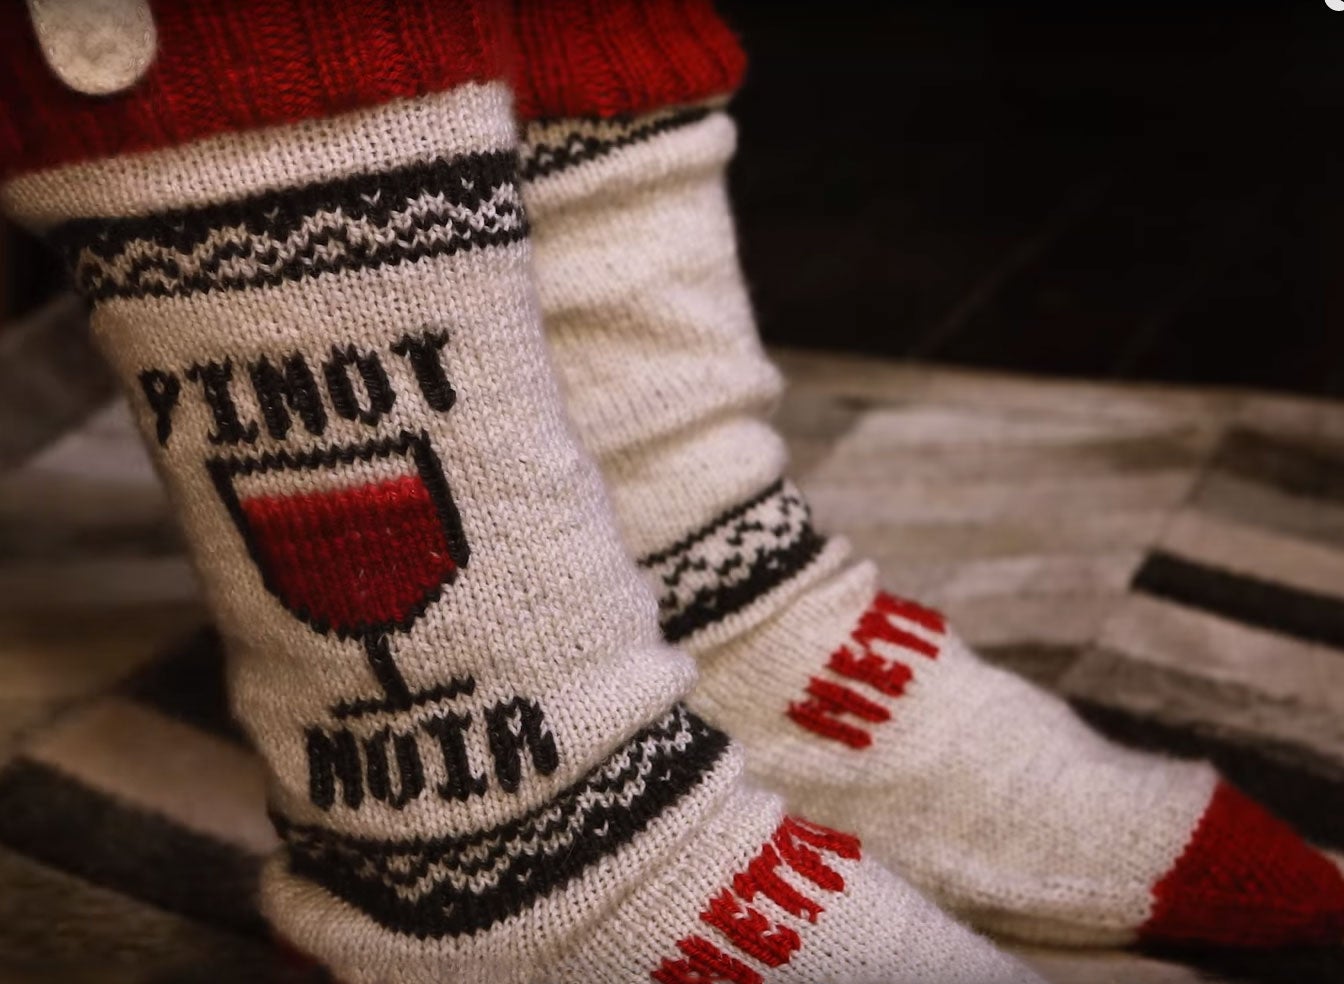 Netflix's socks keep you warm and pause your show when you fall asleep